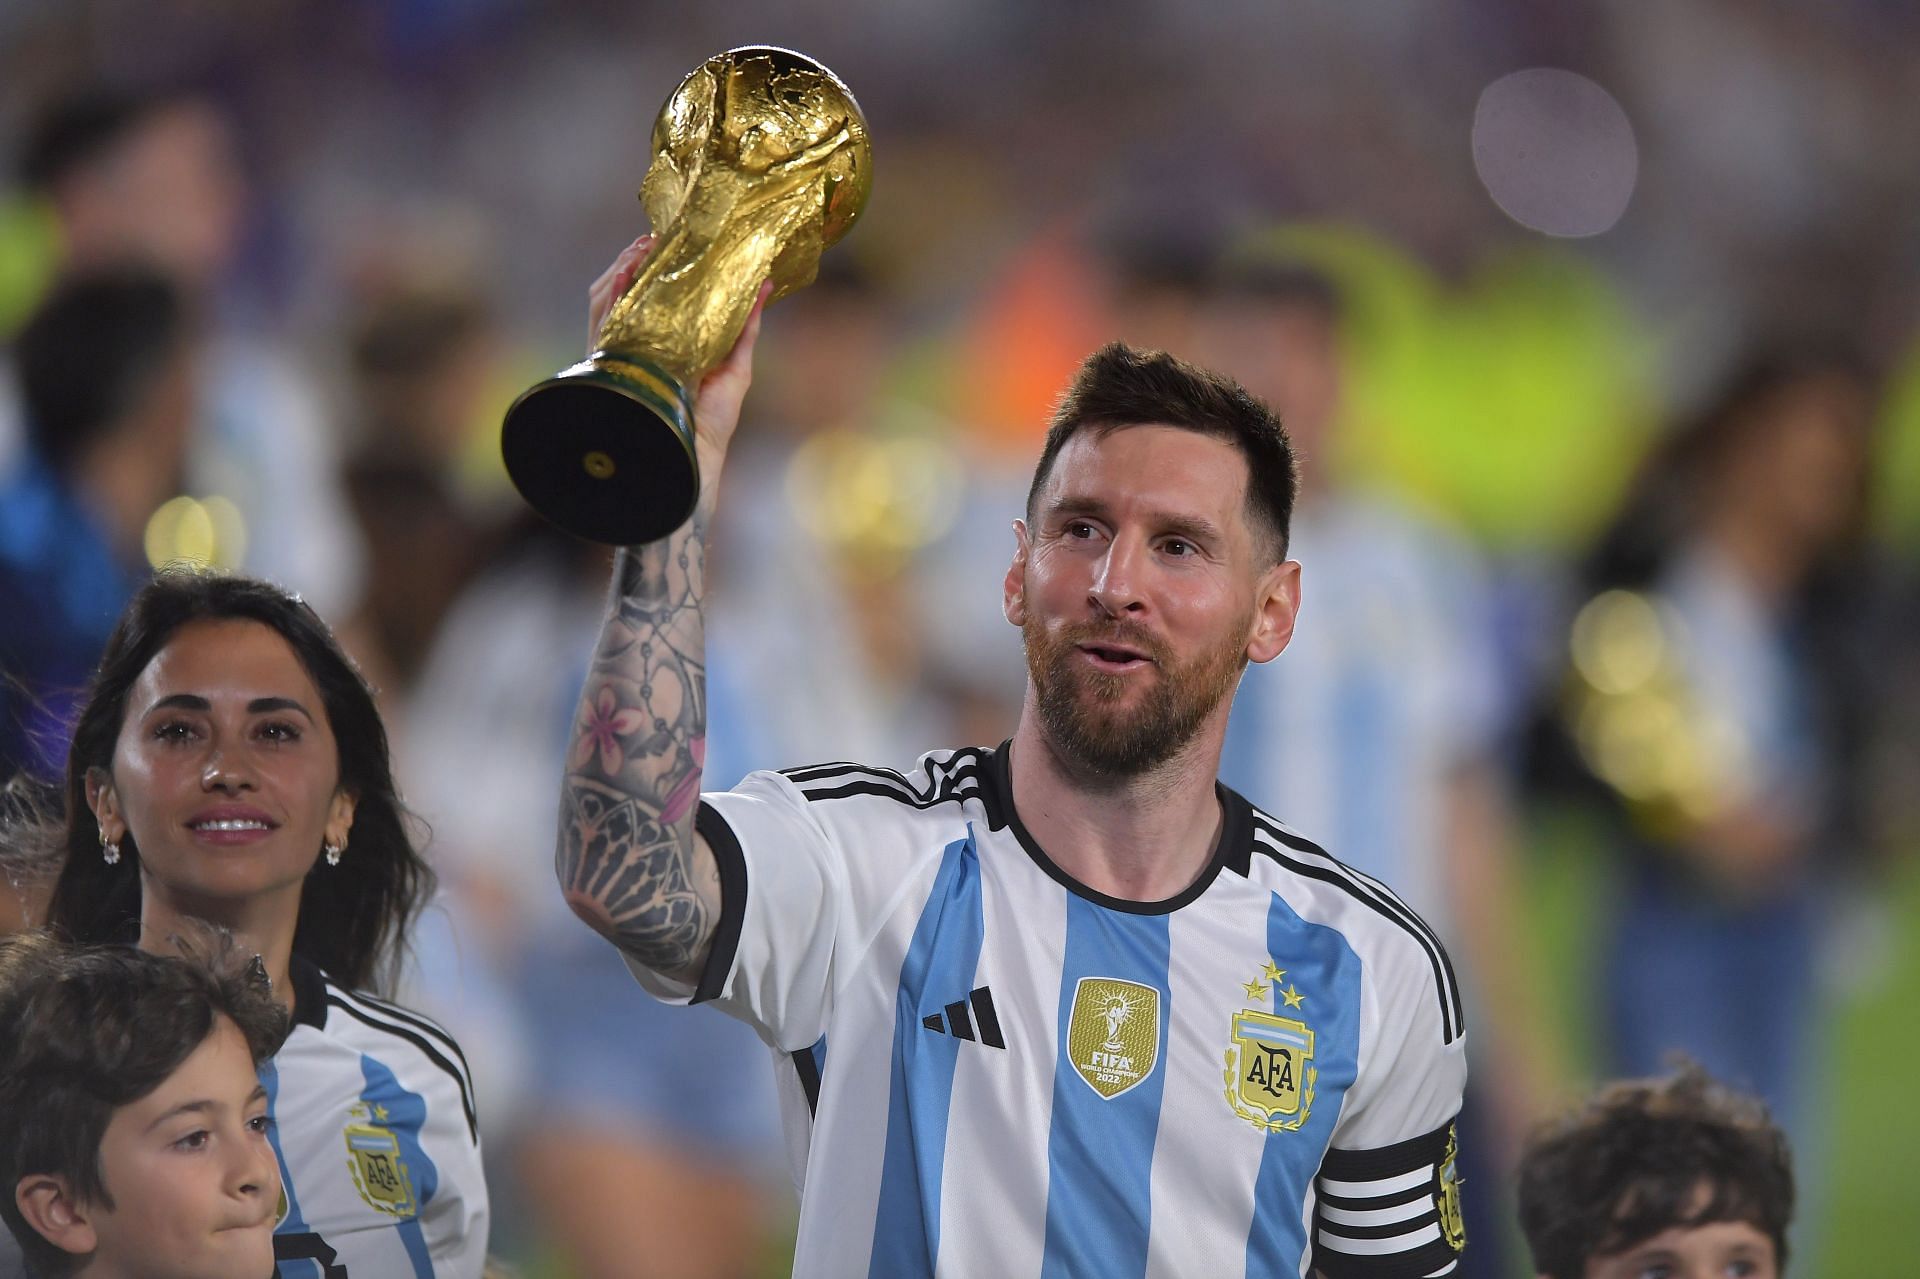 Lionel Messi pens sweet message after winning the World Cup